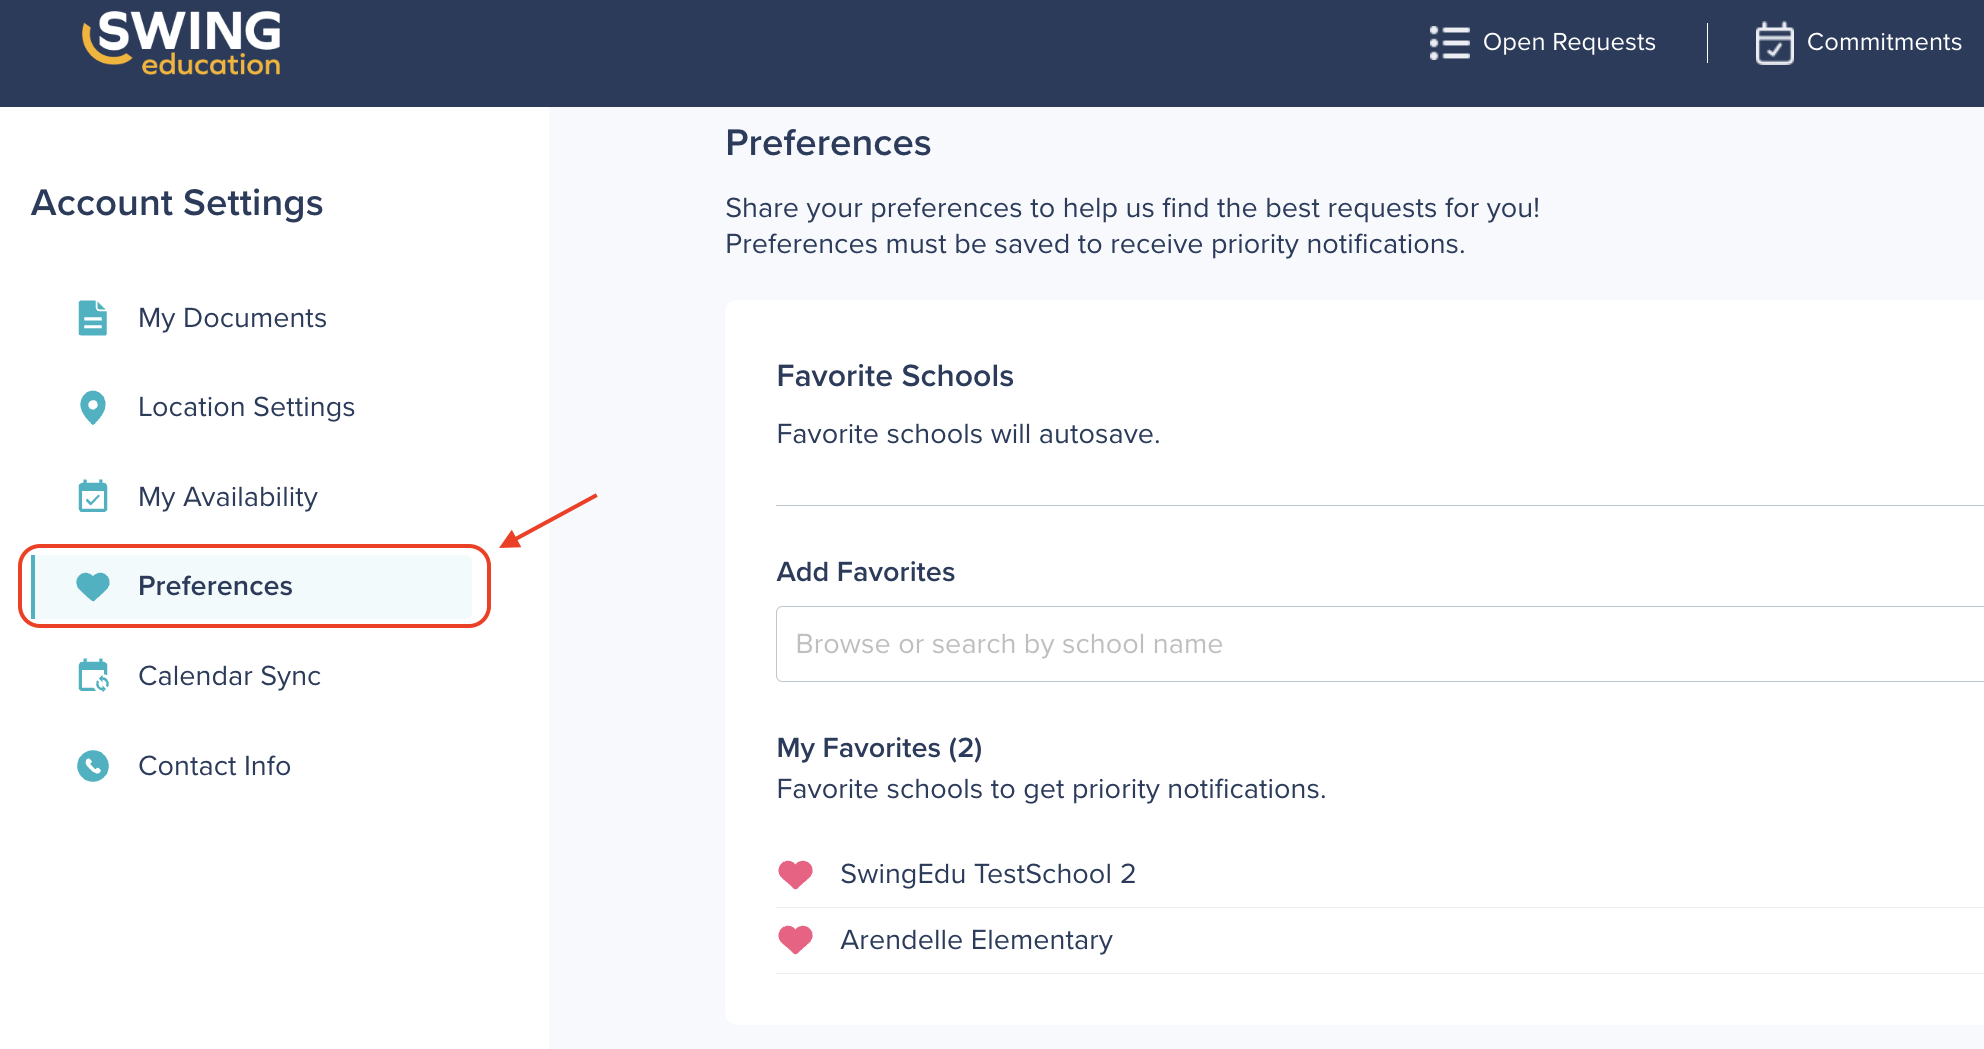 Favorited_Schools_in_Preferences.png